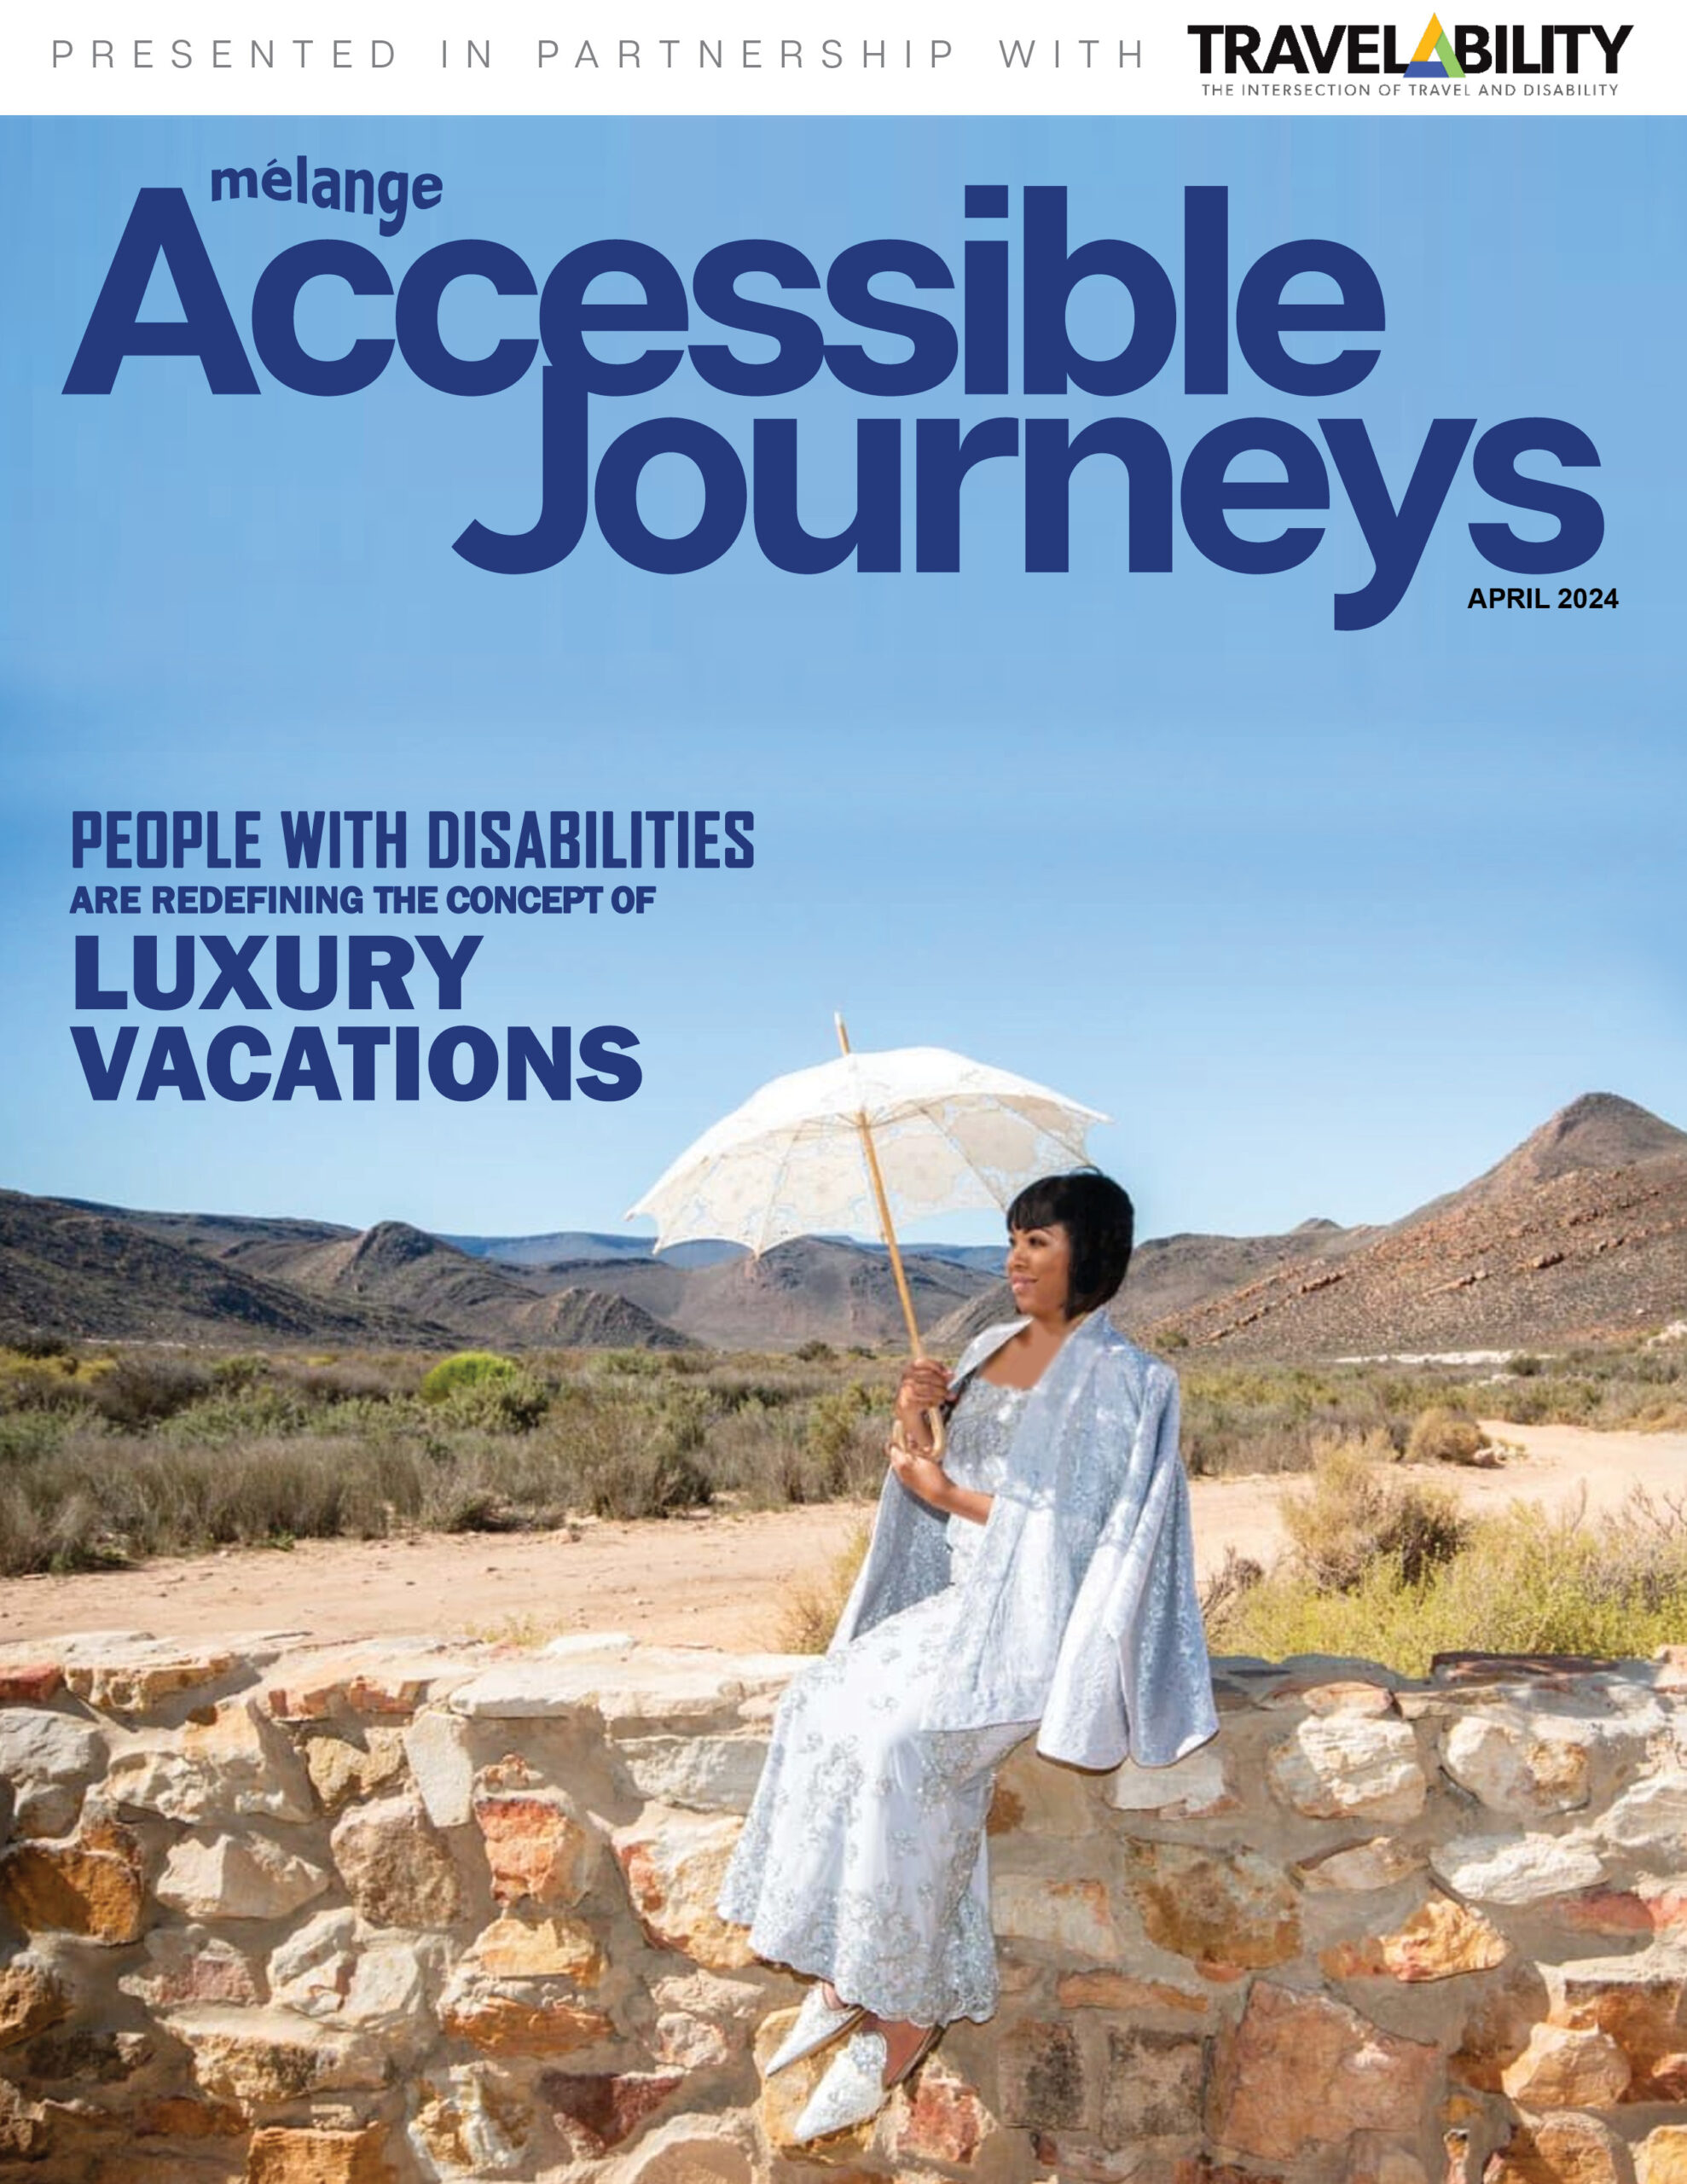 Alt text: "Cover of the April 2024 issue of 'mélange' Accessible Journeys magazine, presented in partnership with 'TRAVELability - The Intersection of Travel and Disability'. The cover features a smiling woman elegantly dressed in a flowing white lace gown with a matching parasol, seated on a stone wall in a desert landscape. The sky is clear and blue, and desert mountains can be seen in the background. The cover headline reads 'Accessible Journeys' and a tagline below states 'People with disabilities are redefining the concept of luxury vacations'